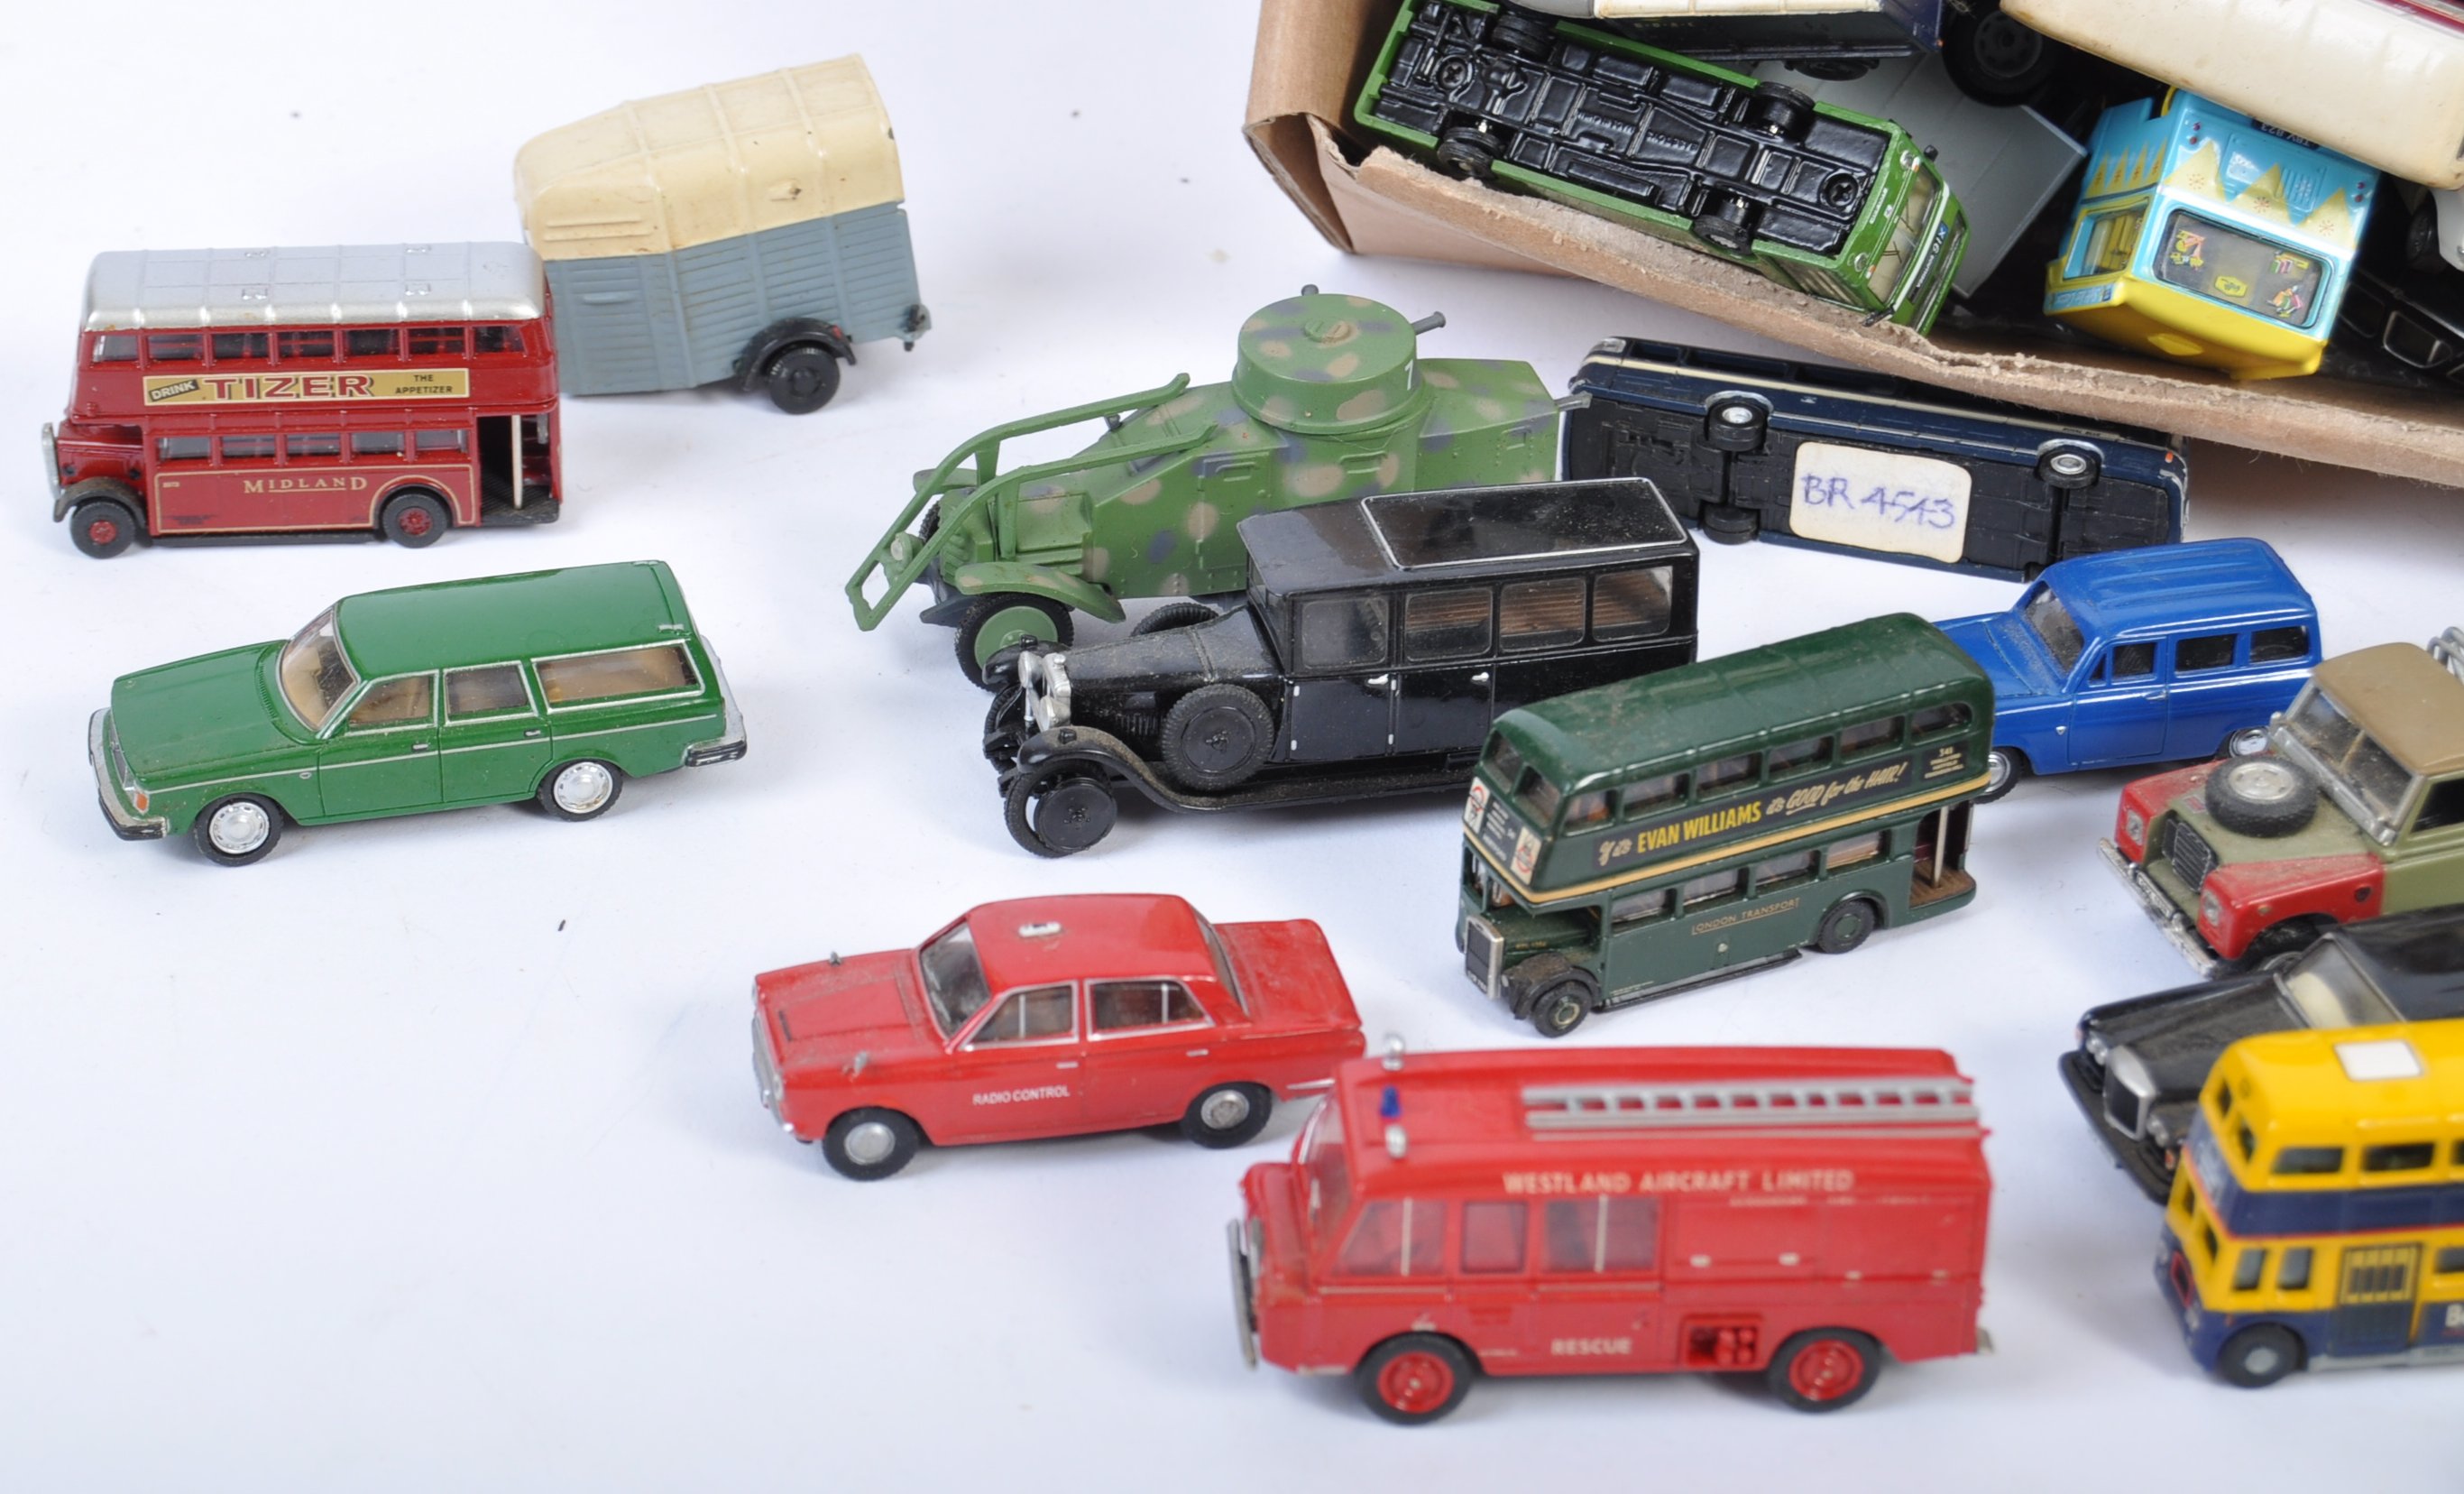 LARGE COLLECTION OF 1/76 SCALE 00 GAUGE MODEL DIEC - Image 3 of 6